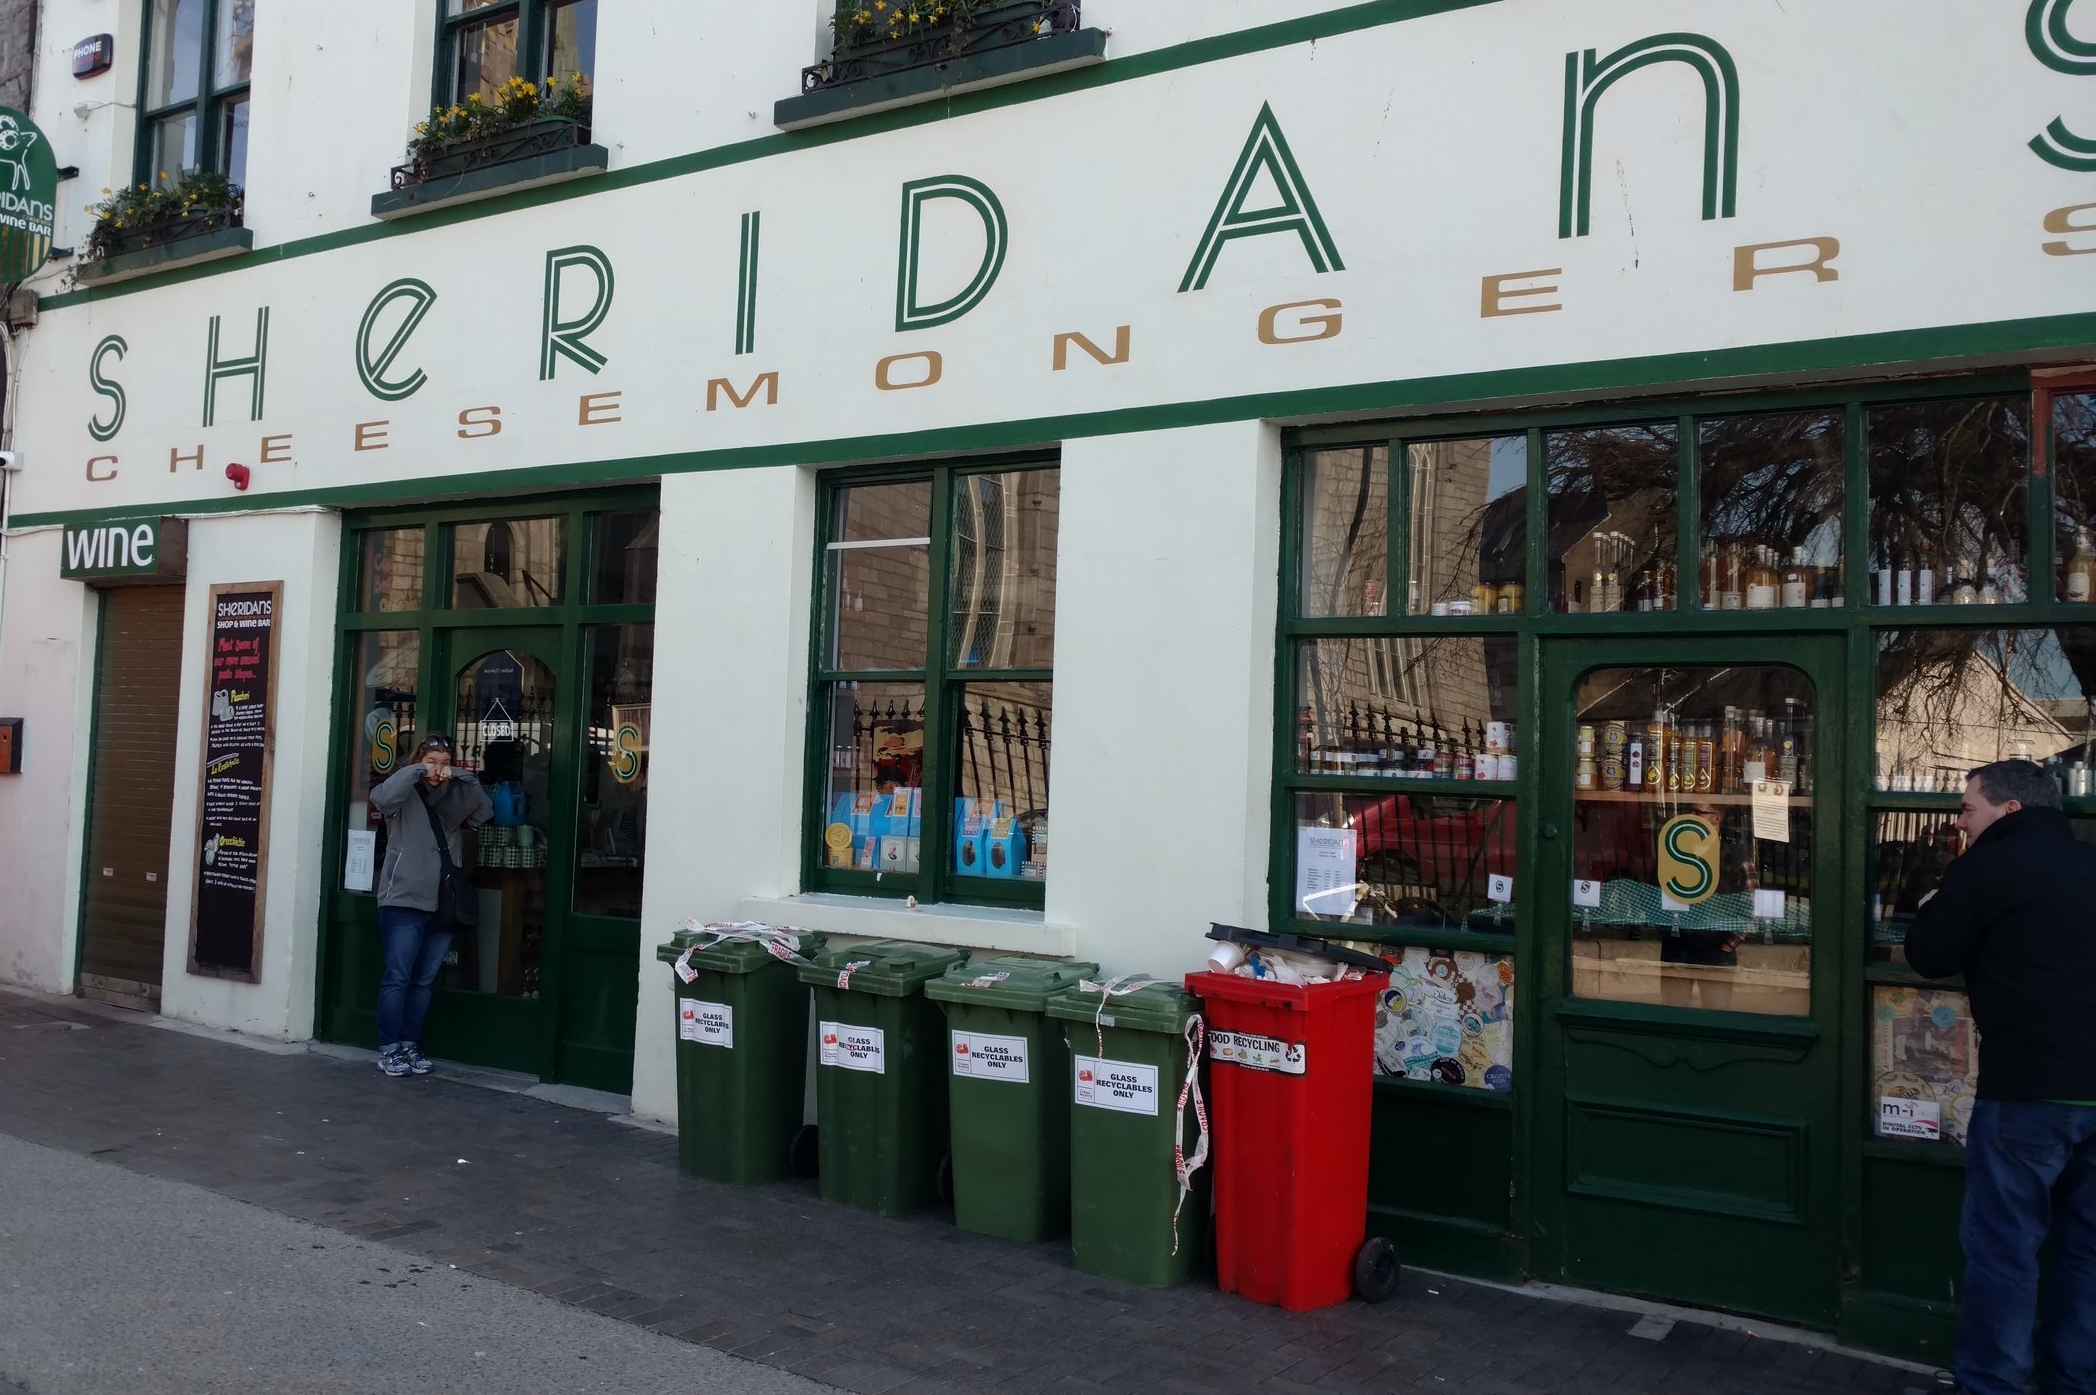 Shedding tears at Sheridan's (closed for the bank holiday), Galway